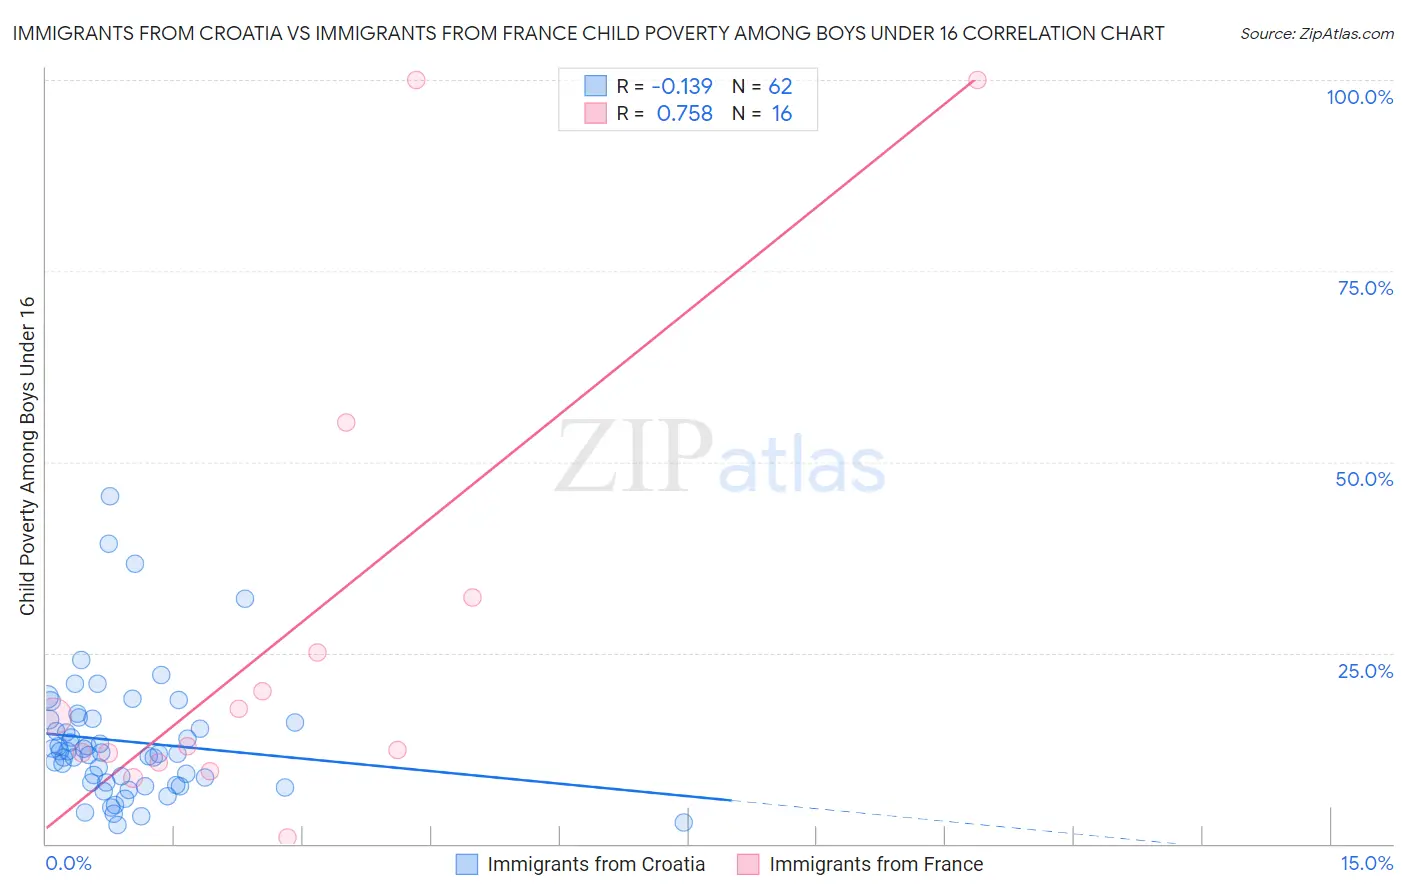 Immigrants from Croatia vs Immigrants from France Child Poverty Among Boys Under 16